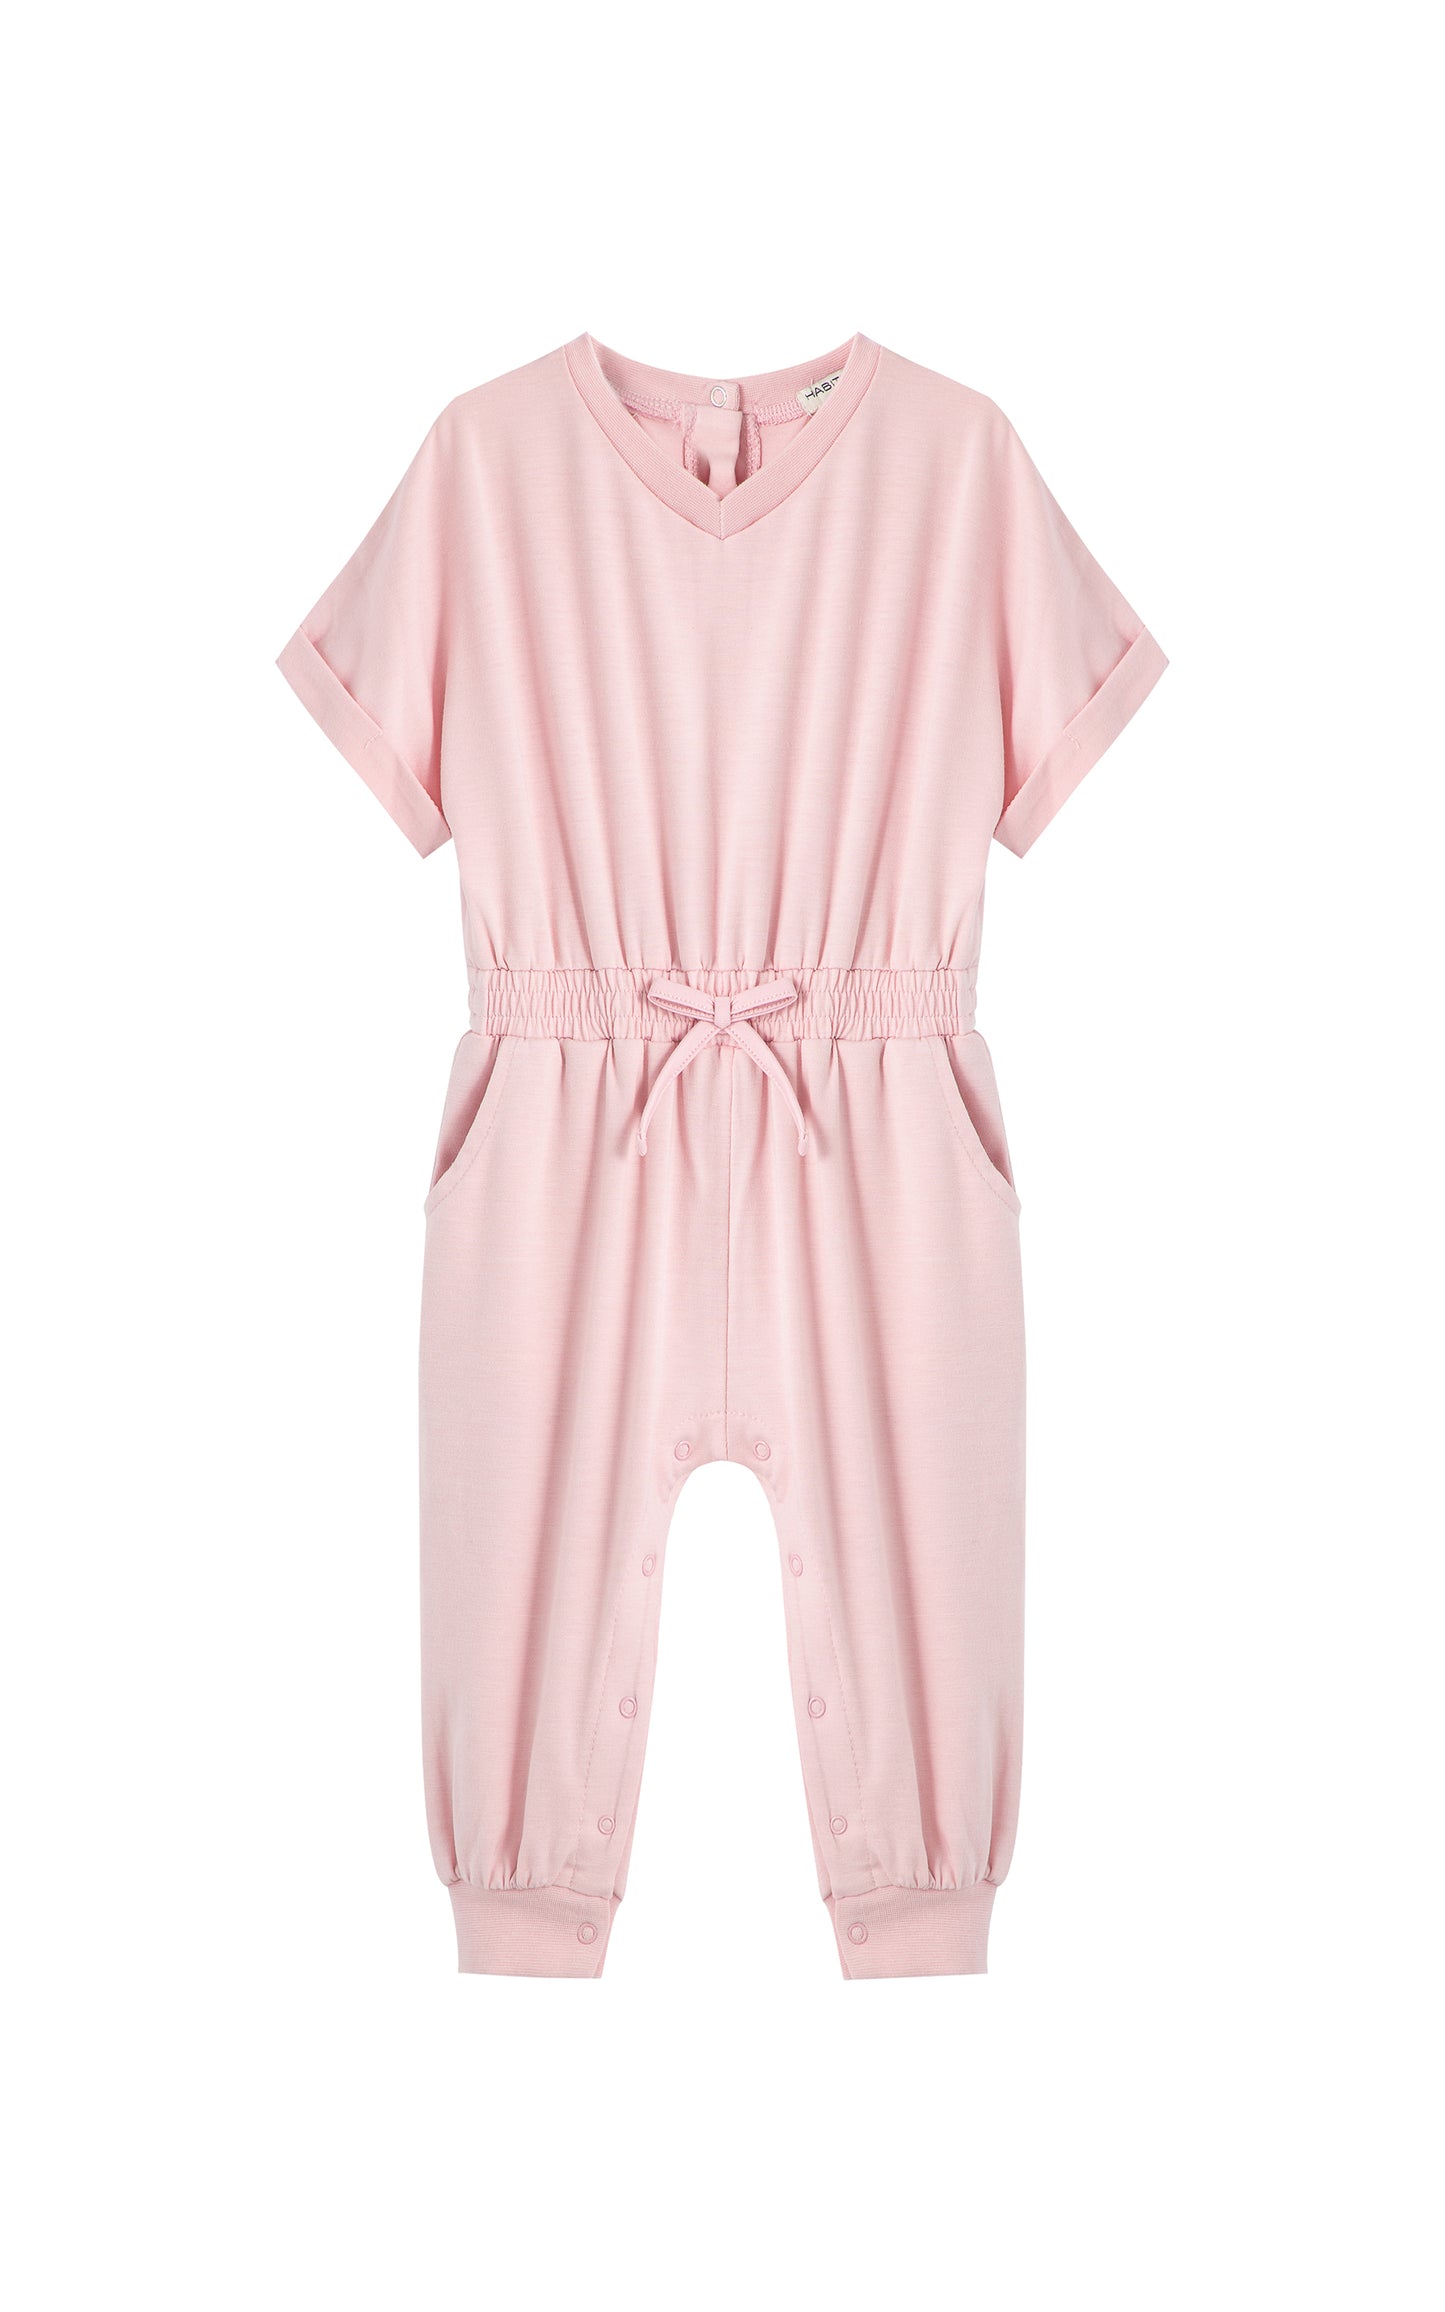 Pink romper with folded cuff sleeves and tie at waist. 